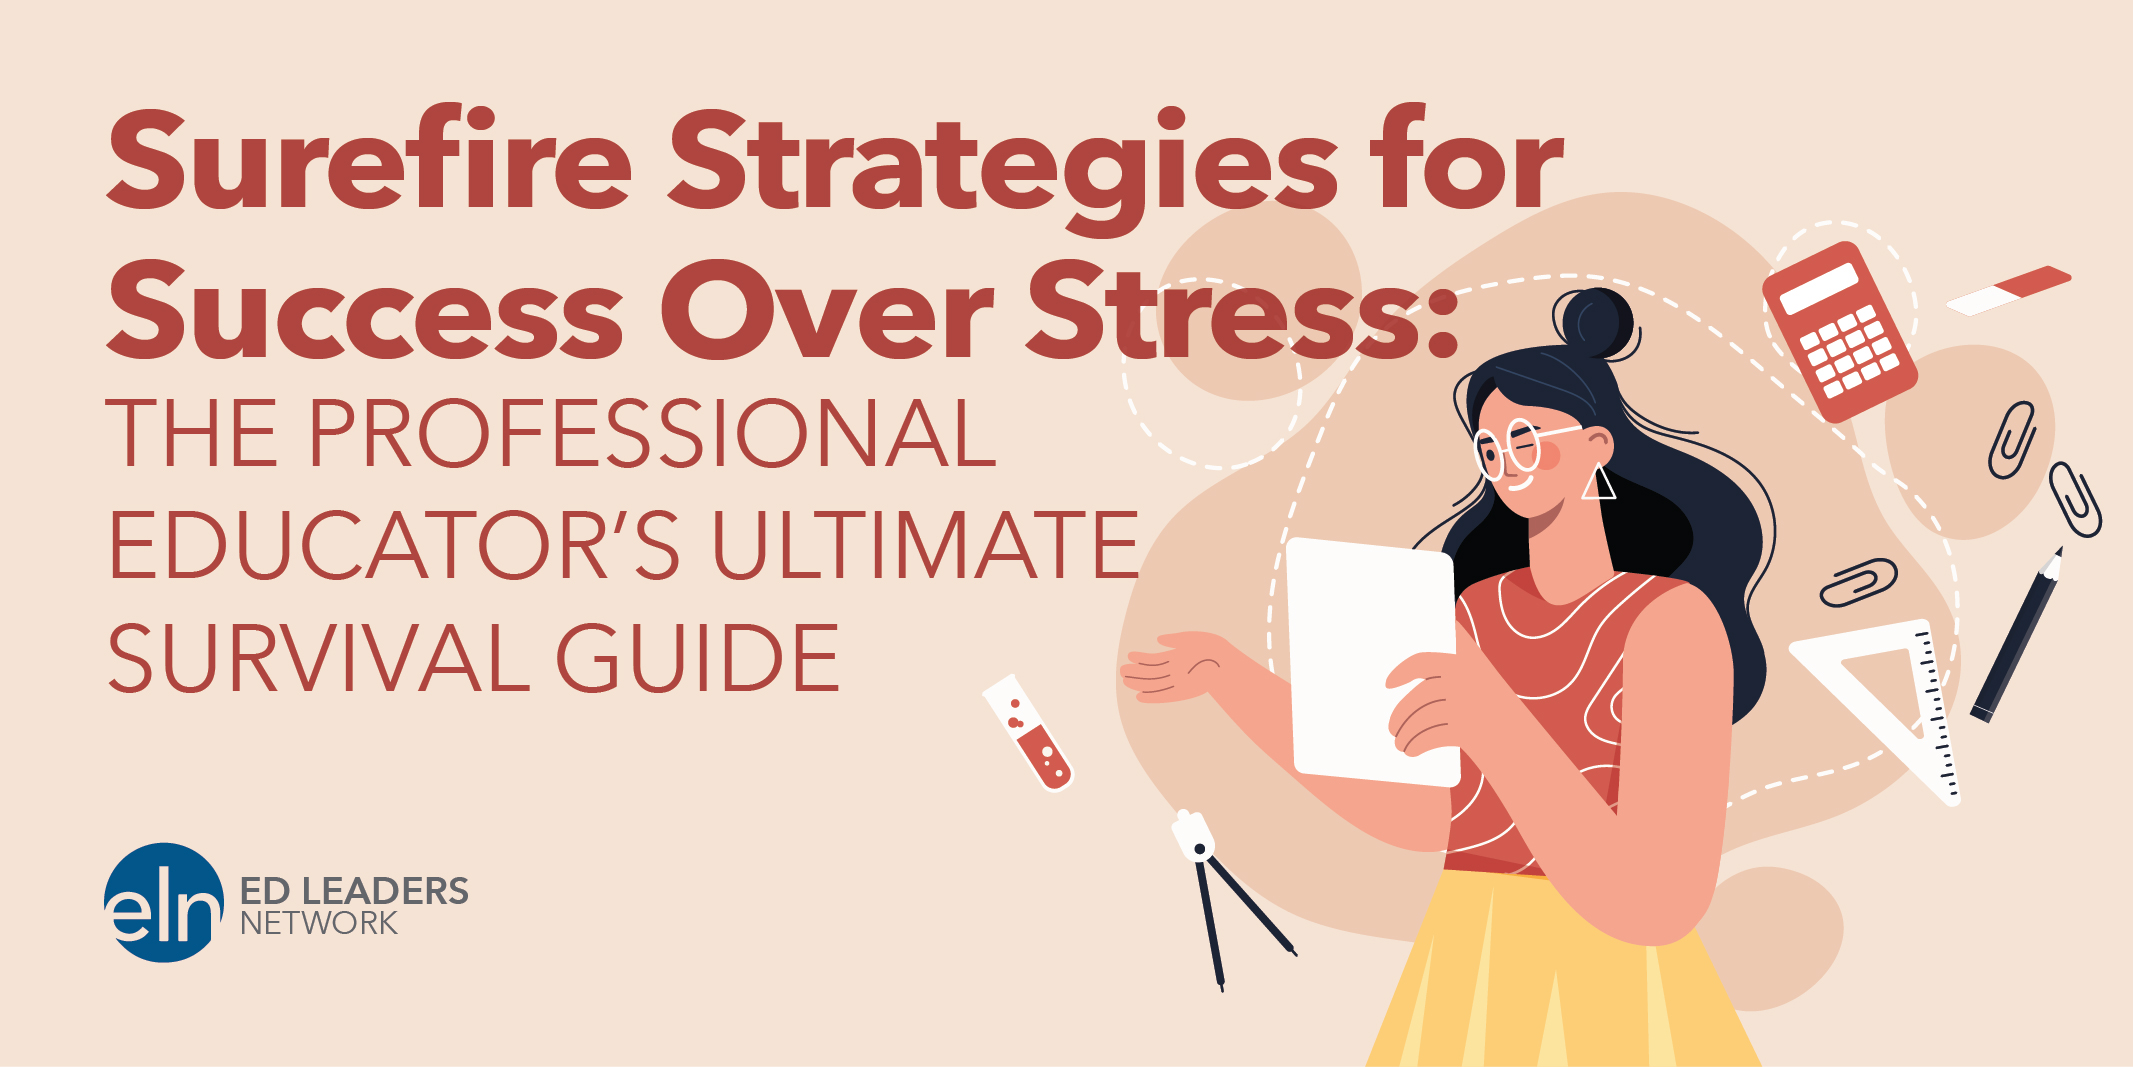 Surefire Strategies for Success Over Stress: The Professional Educator's Ultimate Survival Guide. Ed Leaders Network logo.